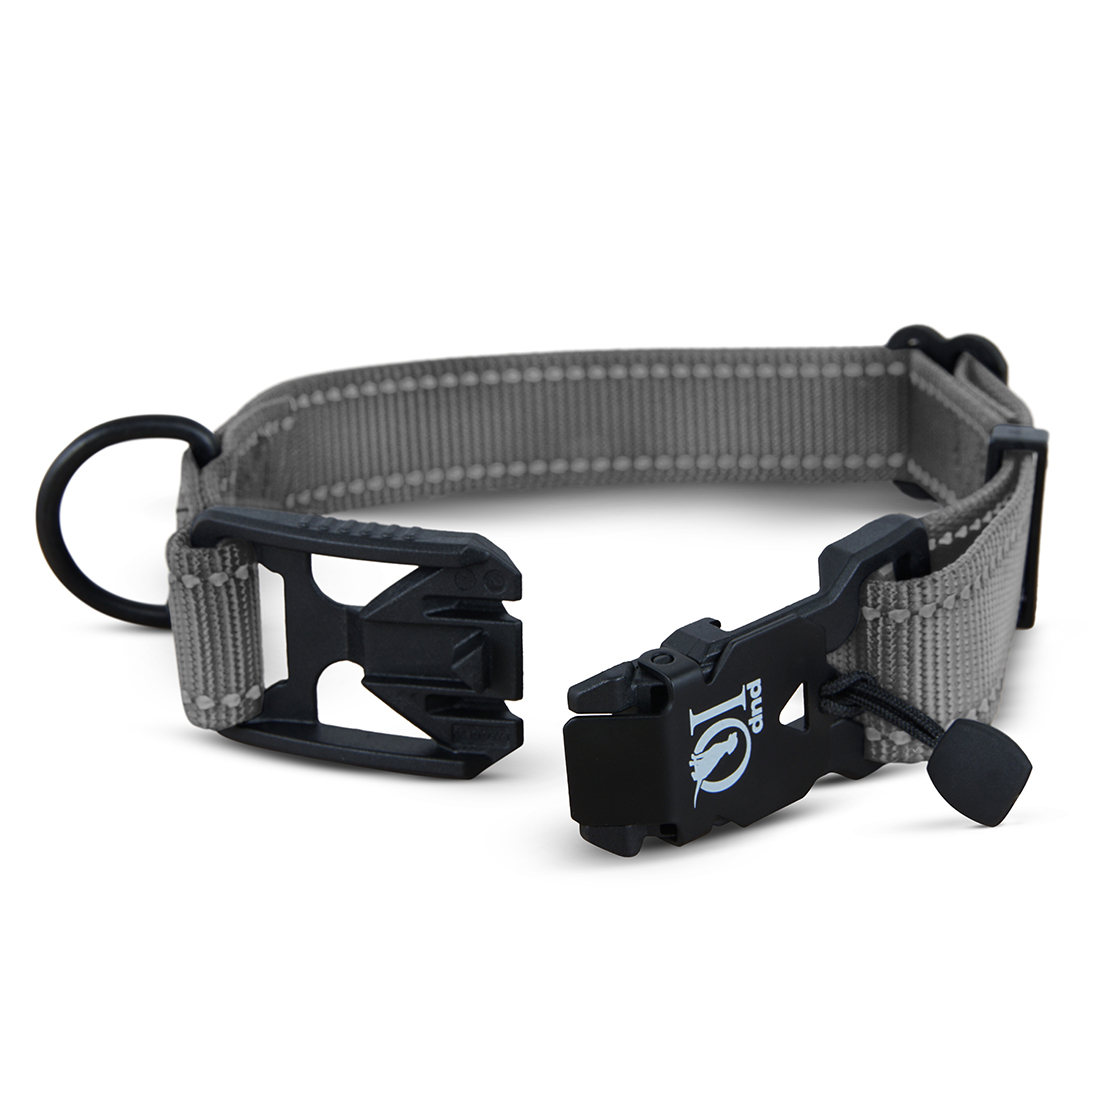 A Smarter Dog Collar: Smart Snap Magnetic Dog Collar by Pup IQ | Newswire